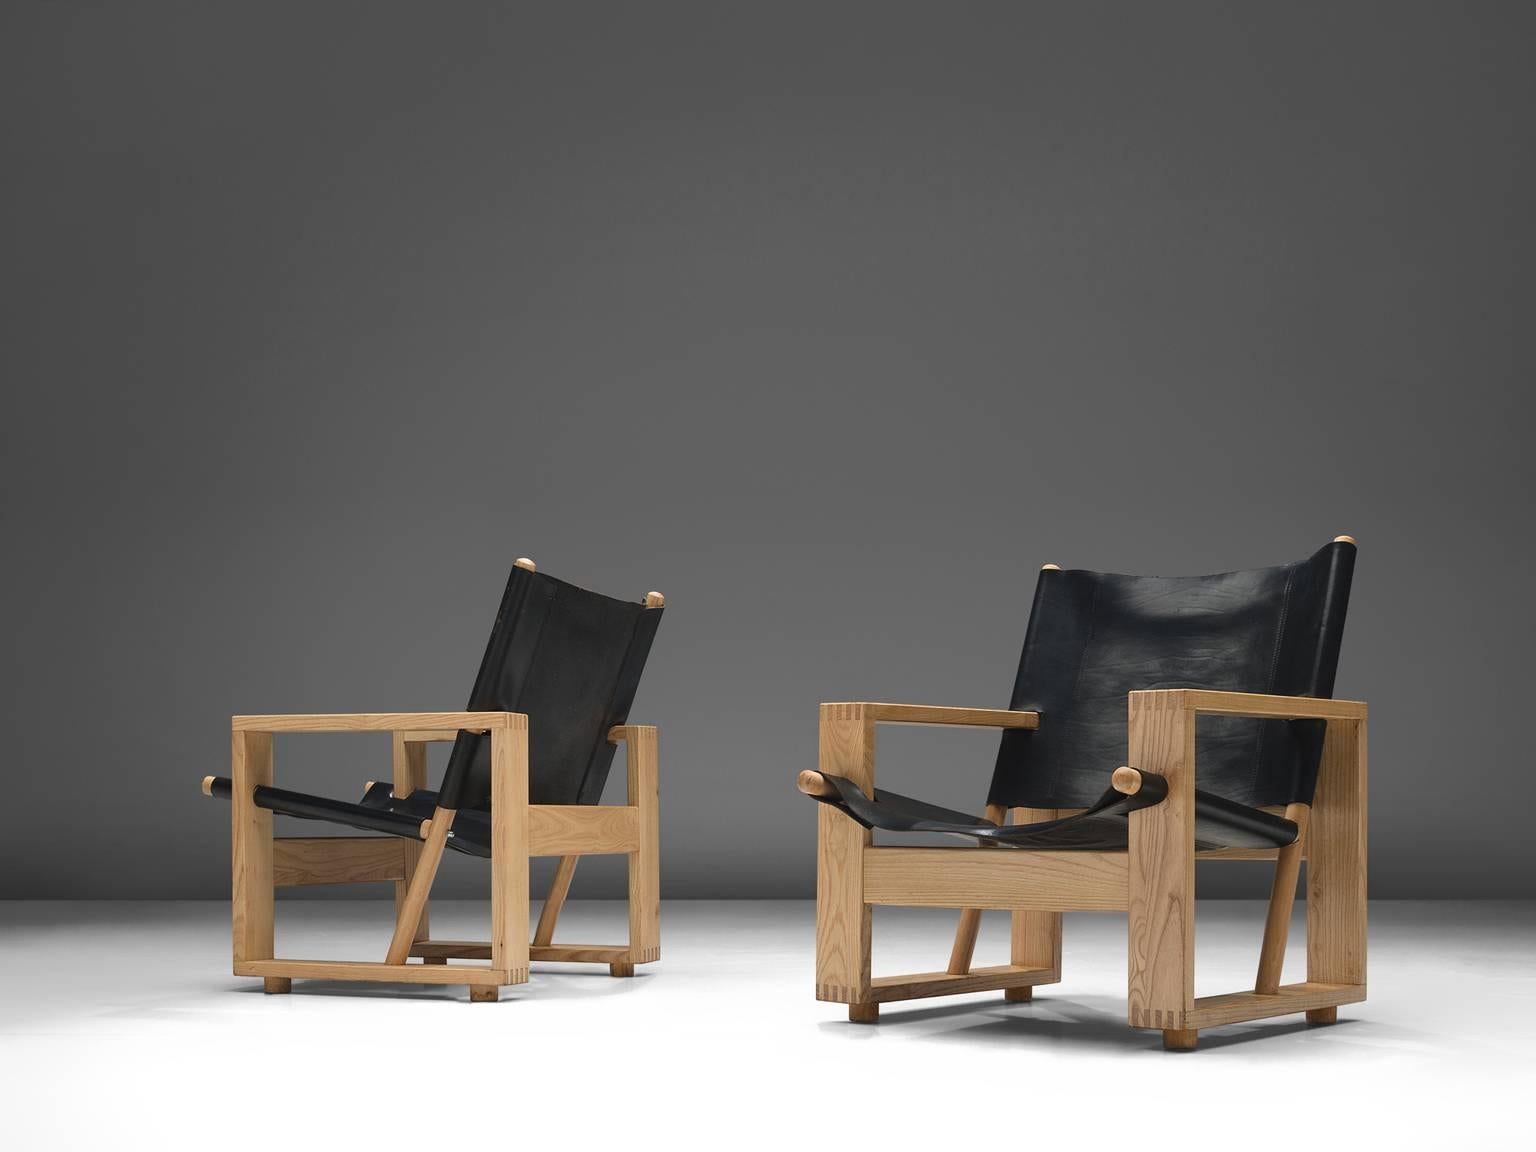 Lounge chairs, black leather and ash, Europe, 1970s.

These sturdy, strong chairs are executed in ash and black leather. The chair is large in both its appearance and seating space. The armrests are executed in ash and have rounded details for the